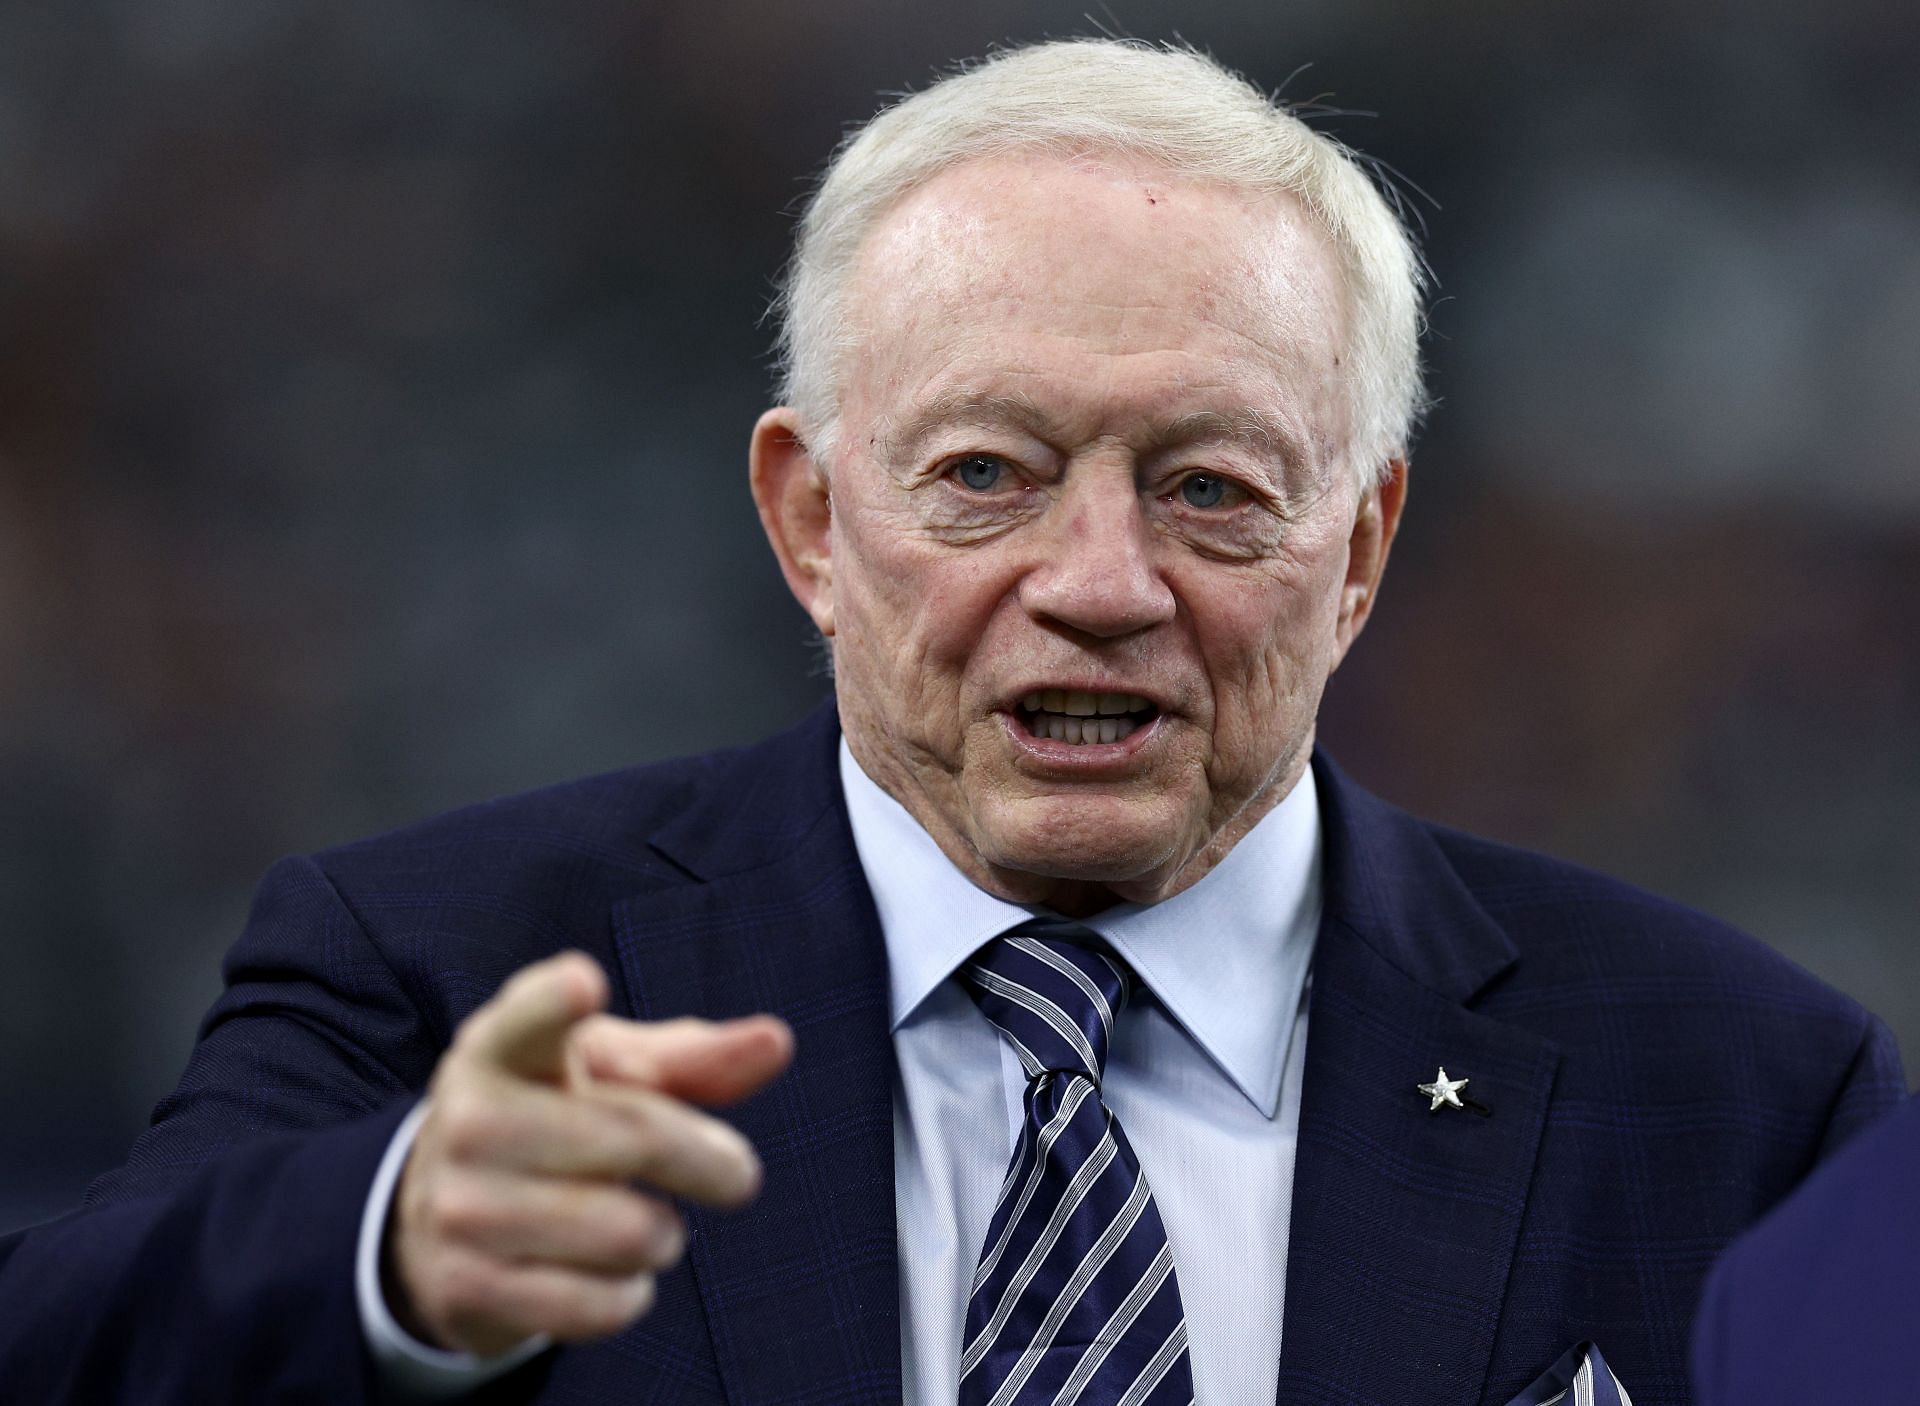 Jerry Jones is under fire for an old image